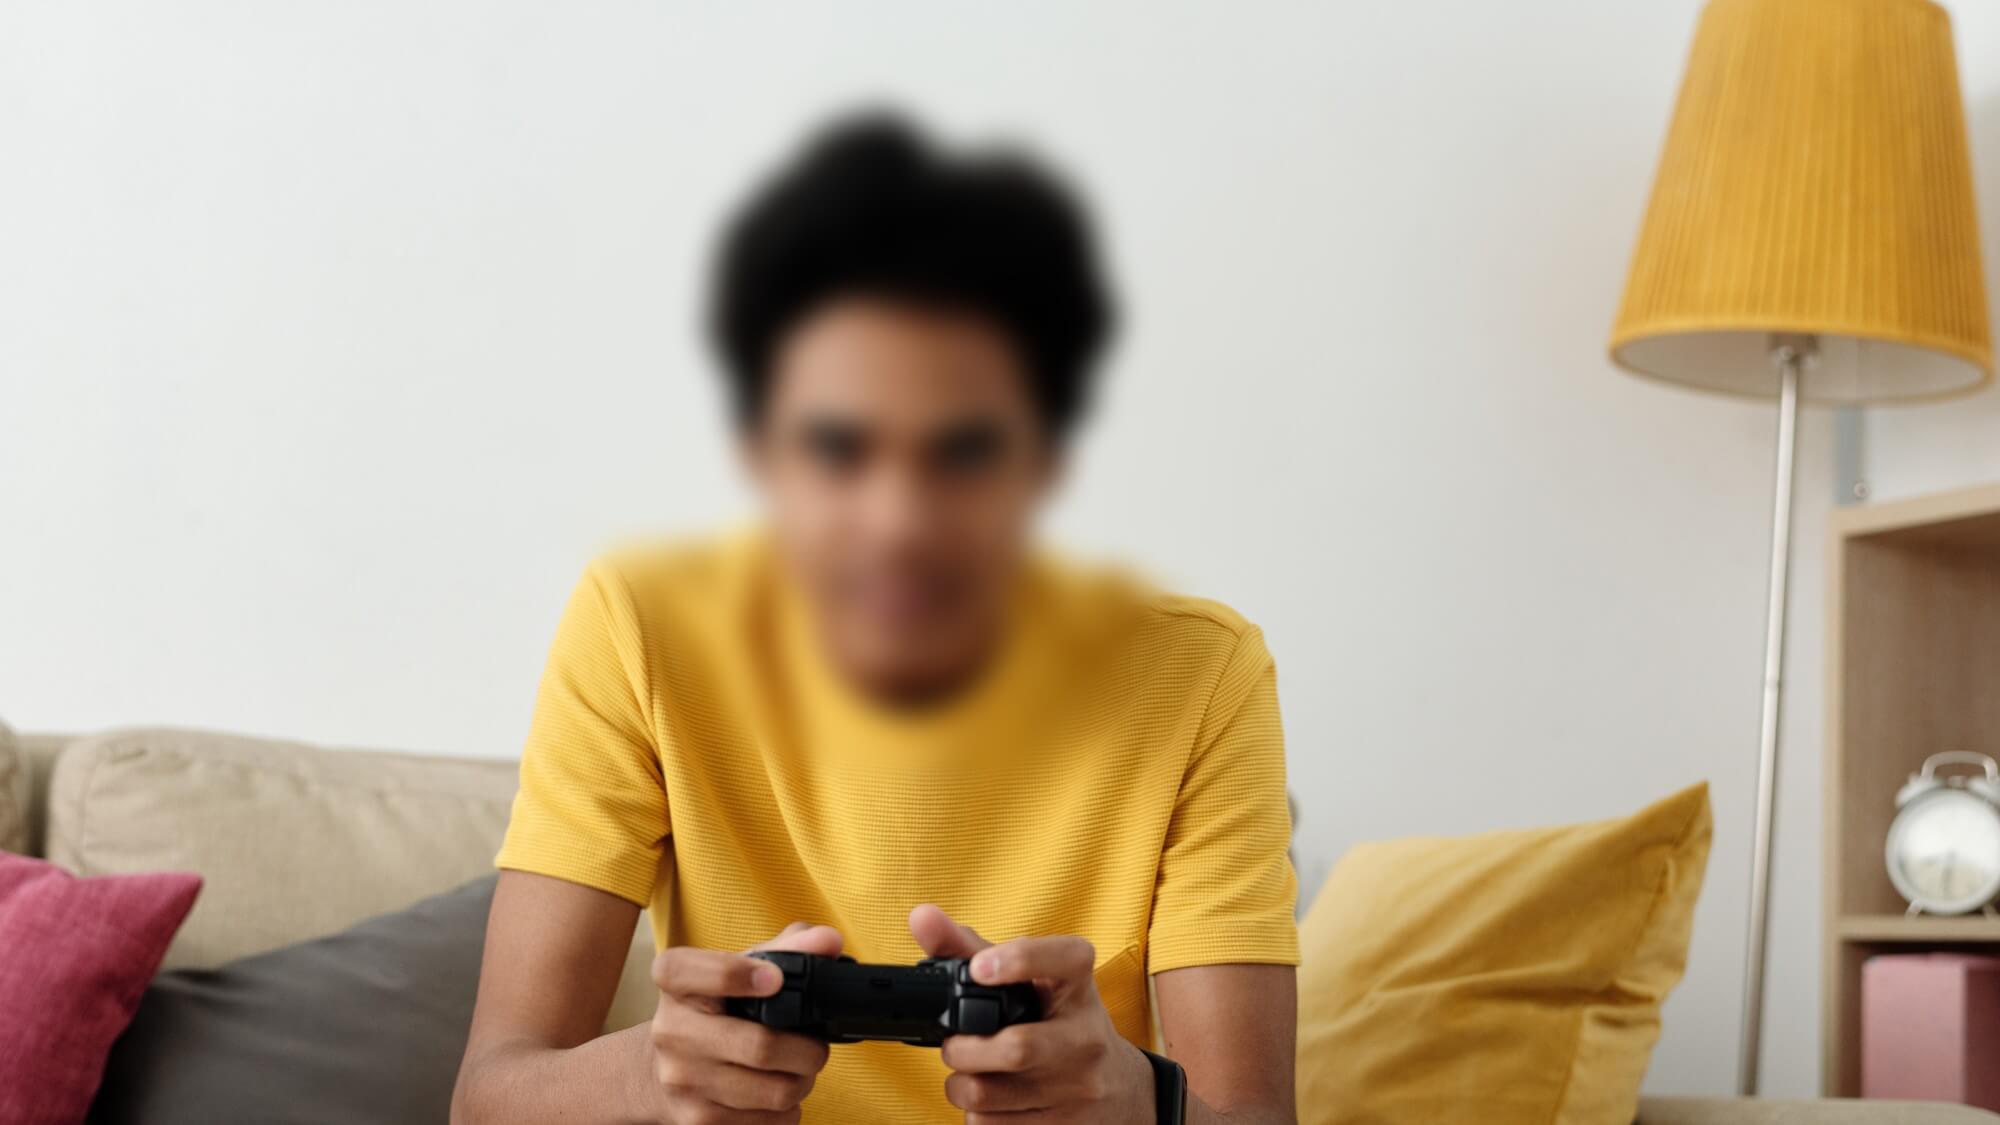 Young teen boy with his face blurred